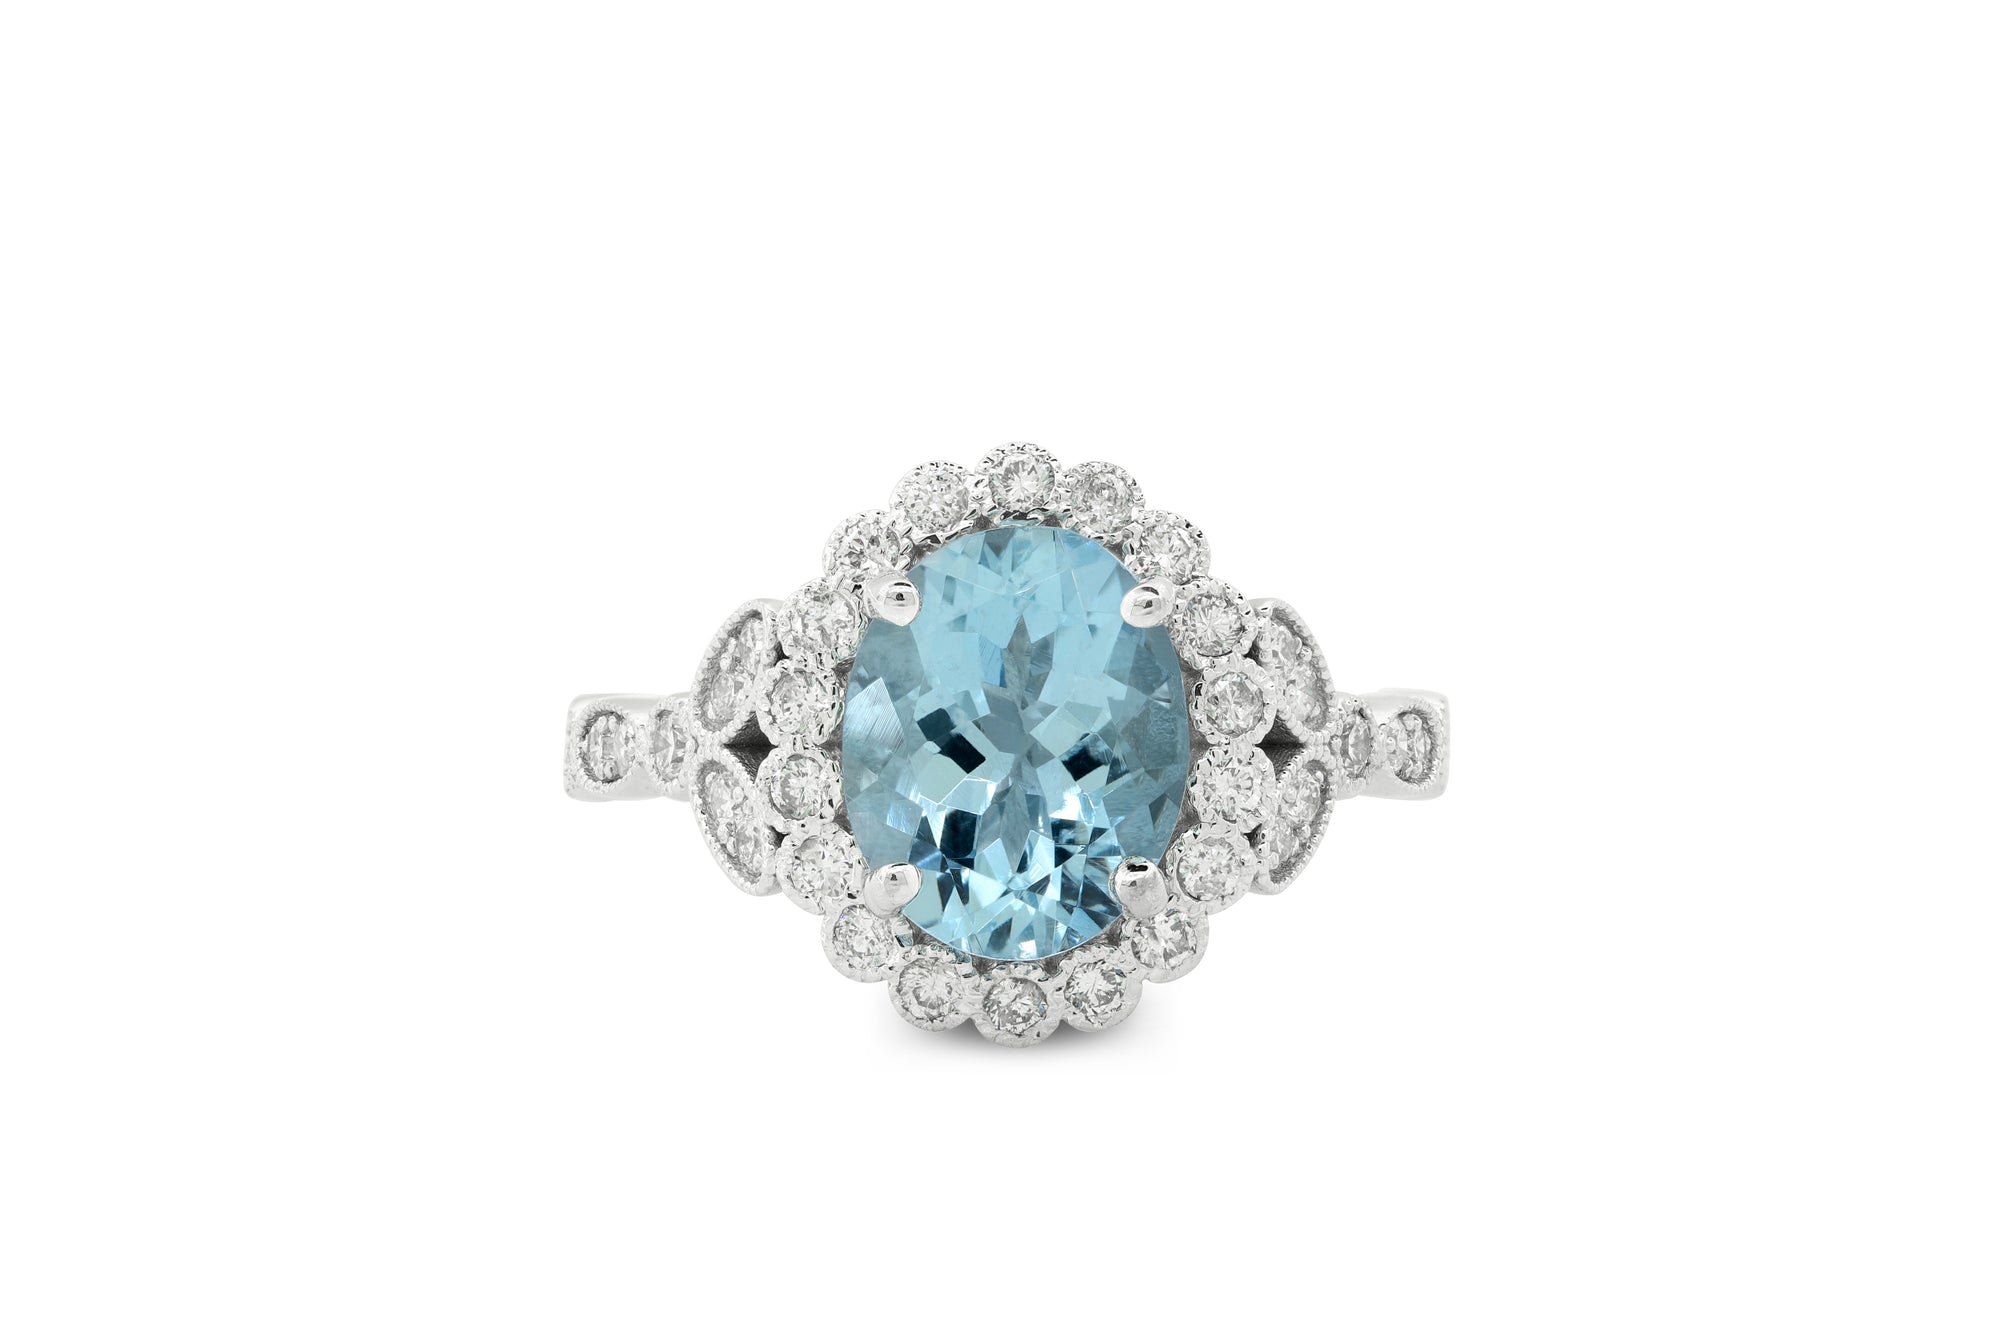 2.20 Oval Aquamarine Diamond Ring 0.60 CT TW 14K White Gold AQMR001 - NorthandSouthJewelry